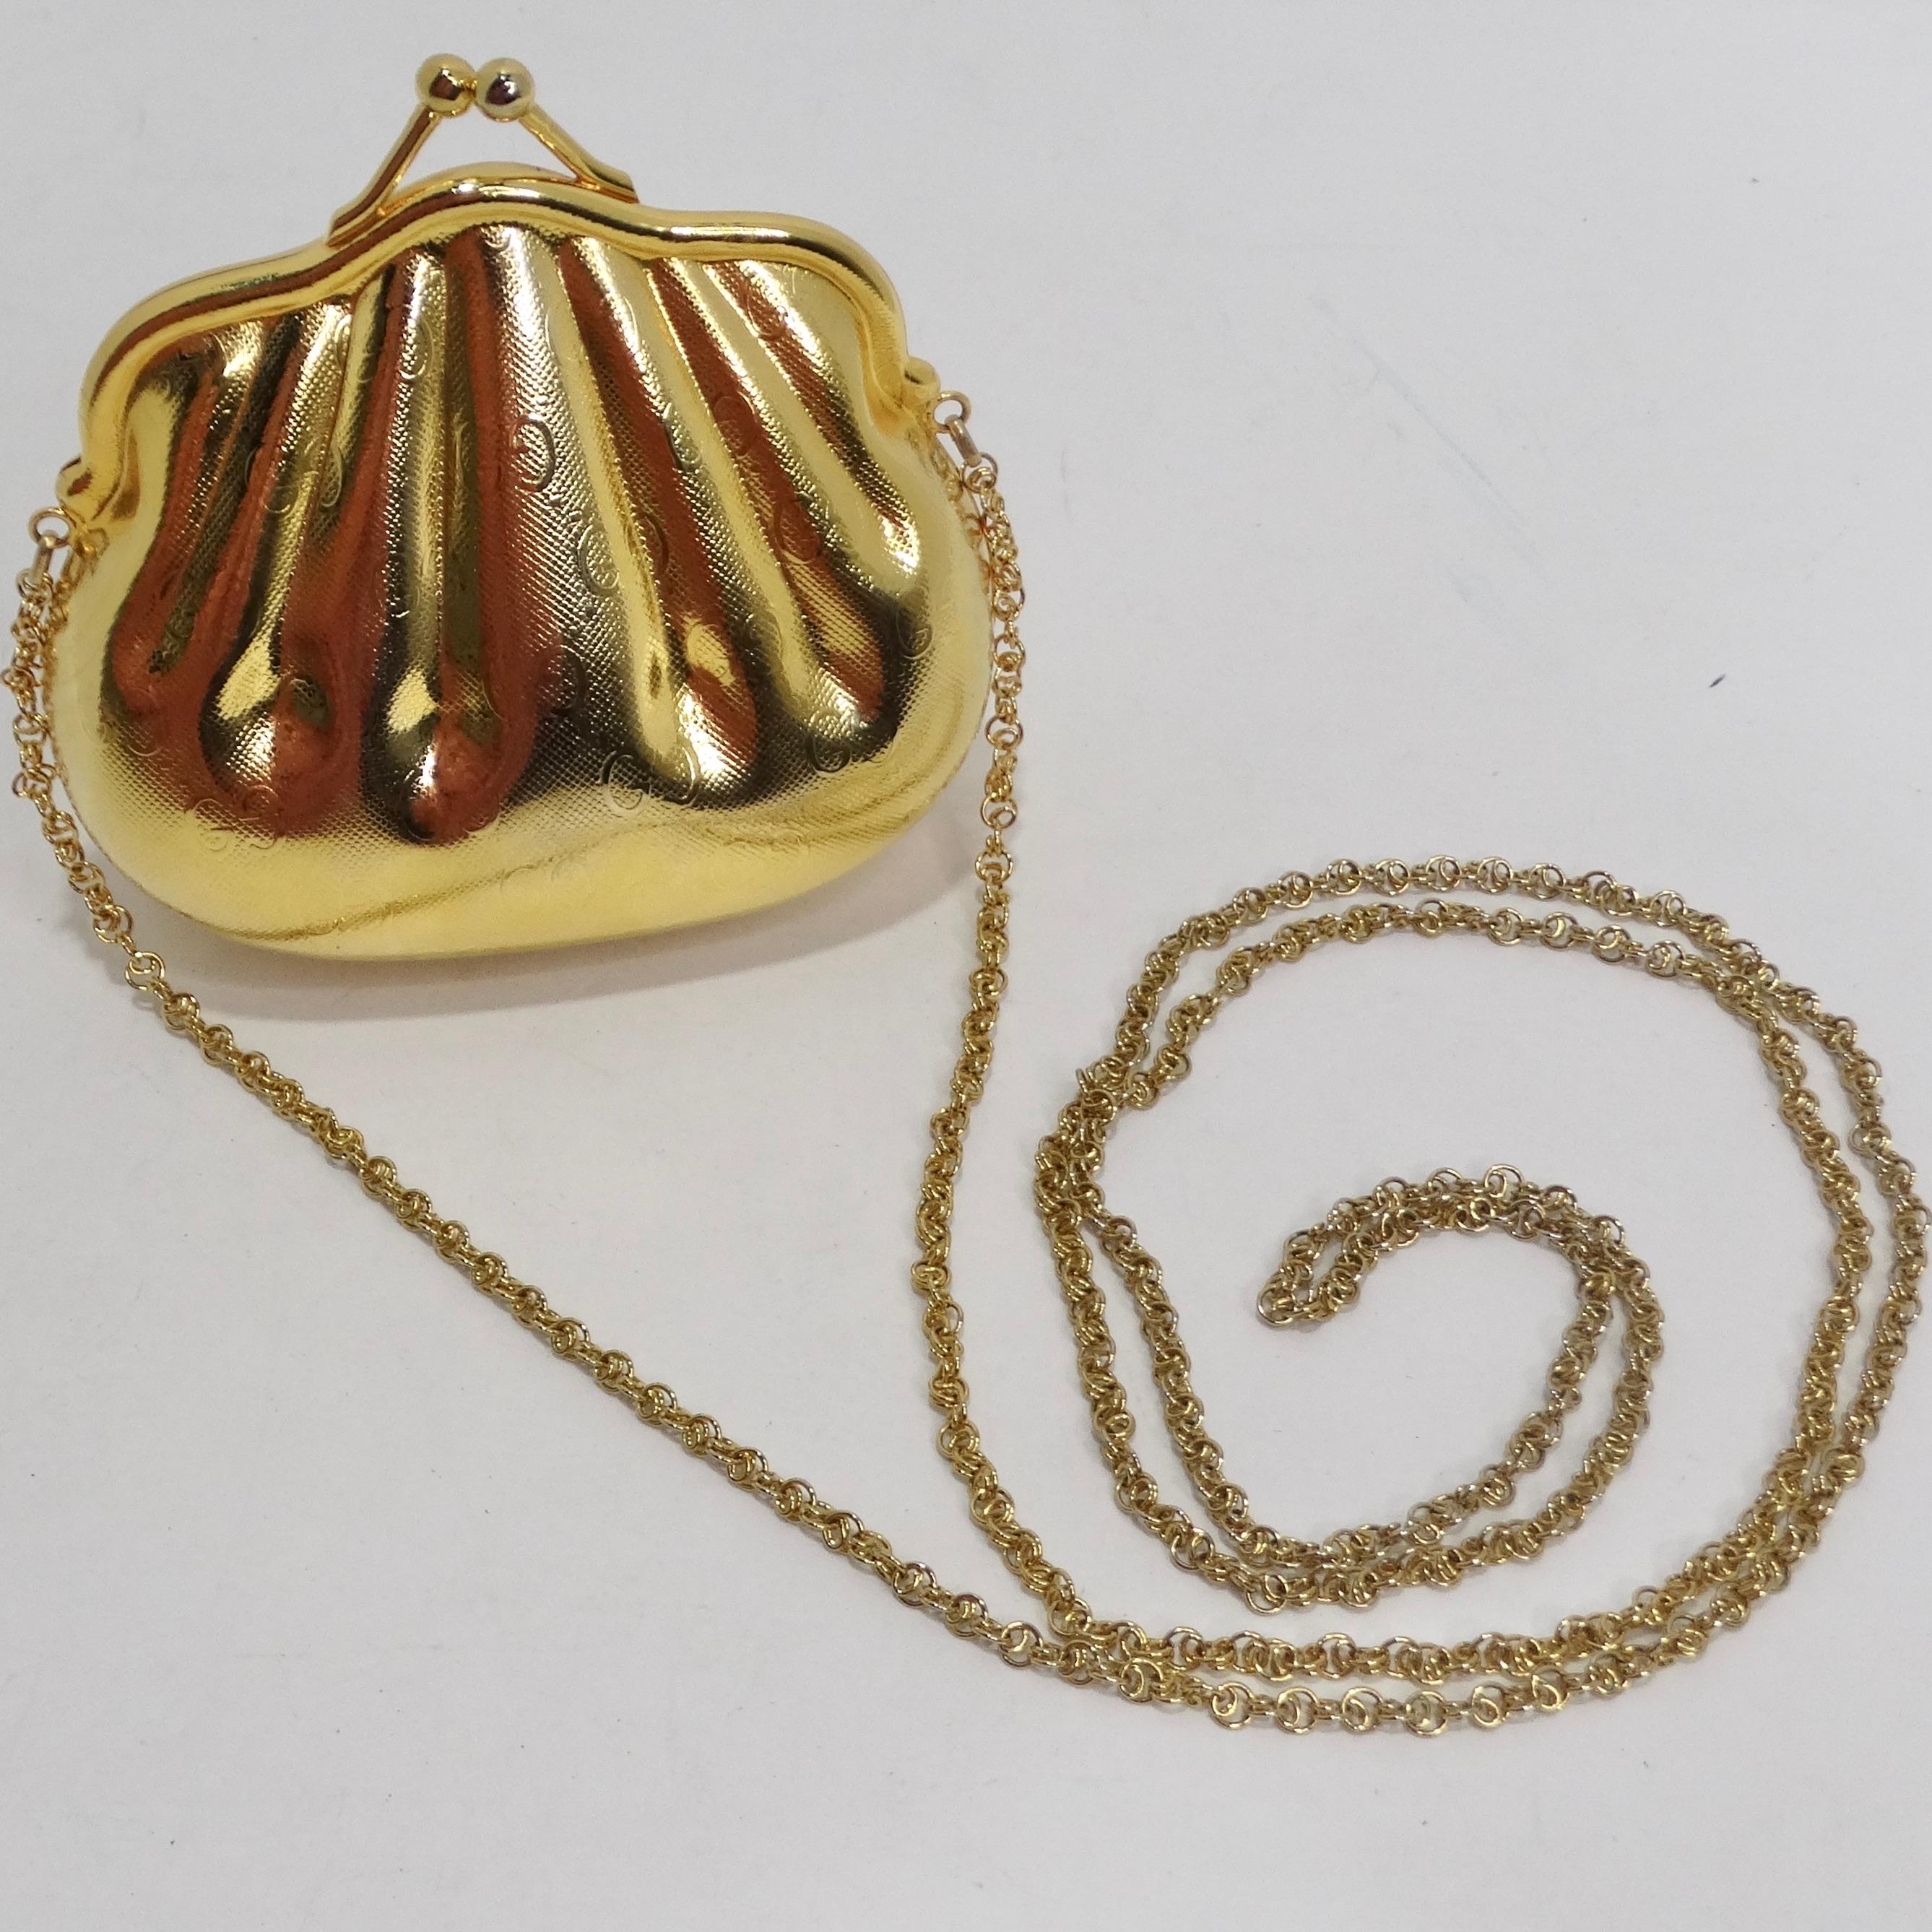 Gucci 1980s Gold Tone Metal Shell Minaudière Evening Bag For Sale 7